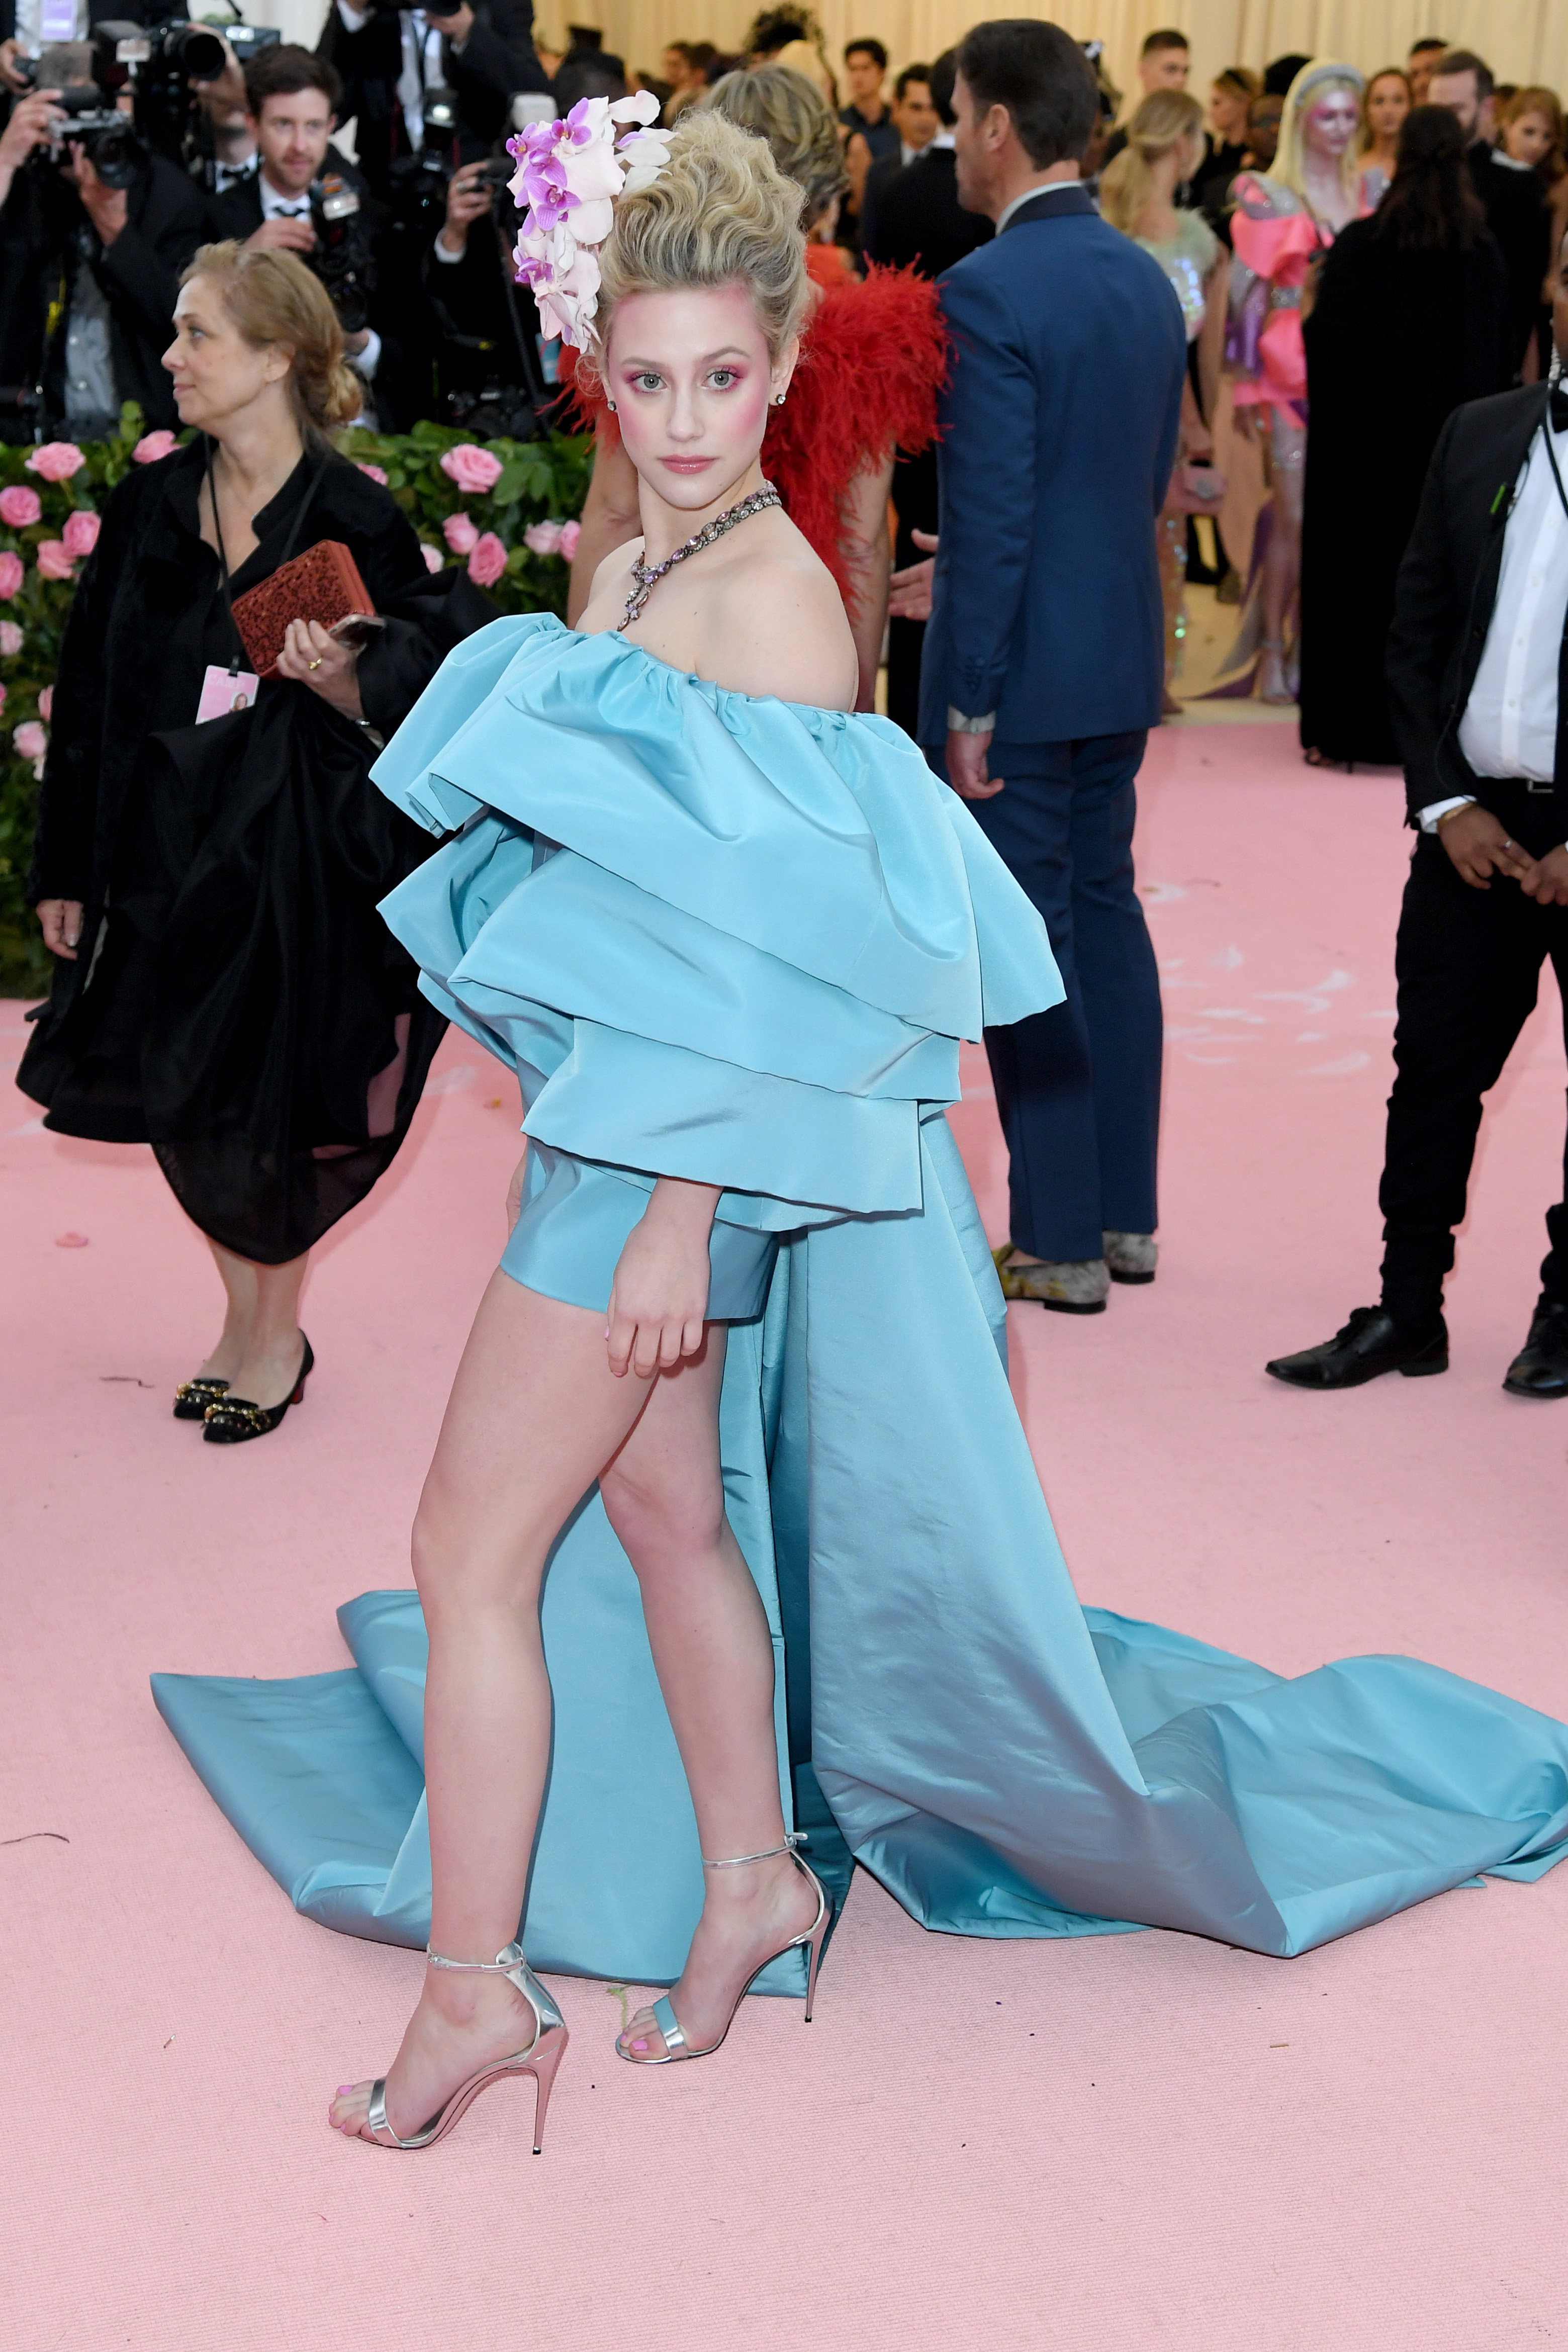 Lili Reinhart at the Met Gala in 2019 in New York | Source: Getty Images